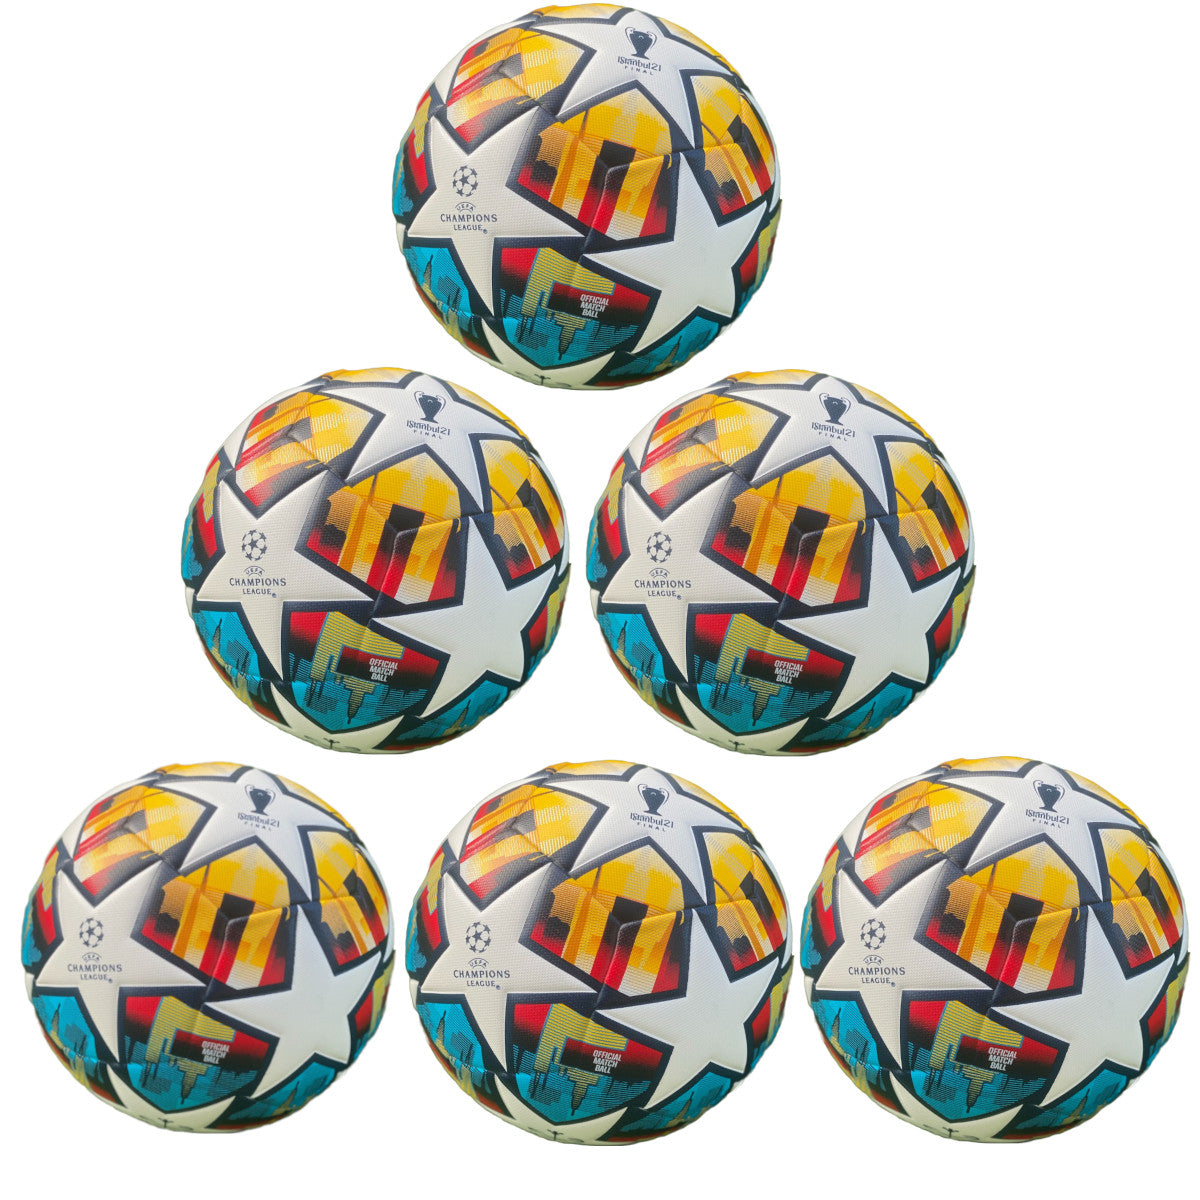 Soccer Ball Size 5 Pack of 10 Champions League Multicolor for Training or Game